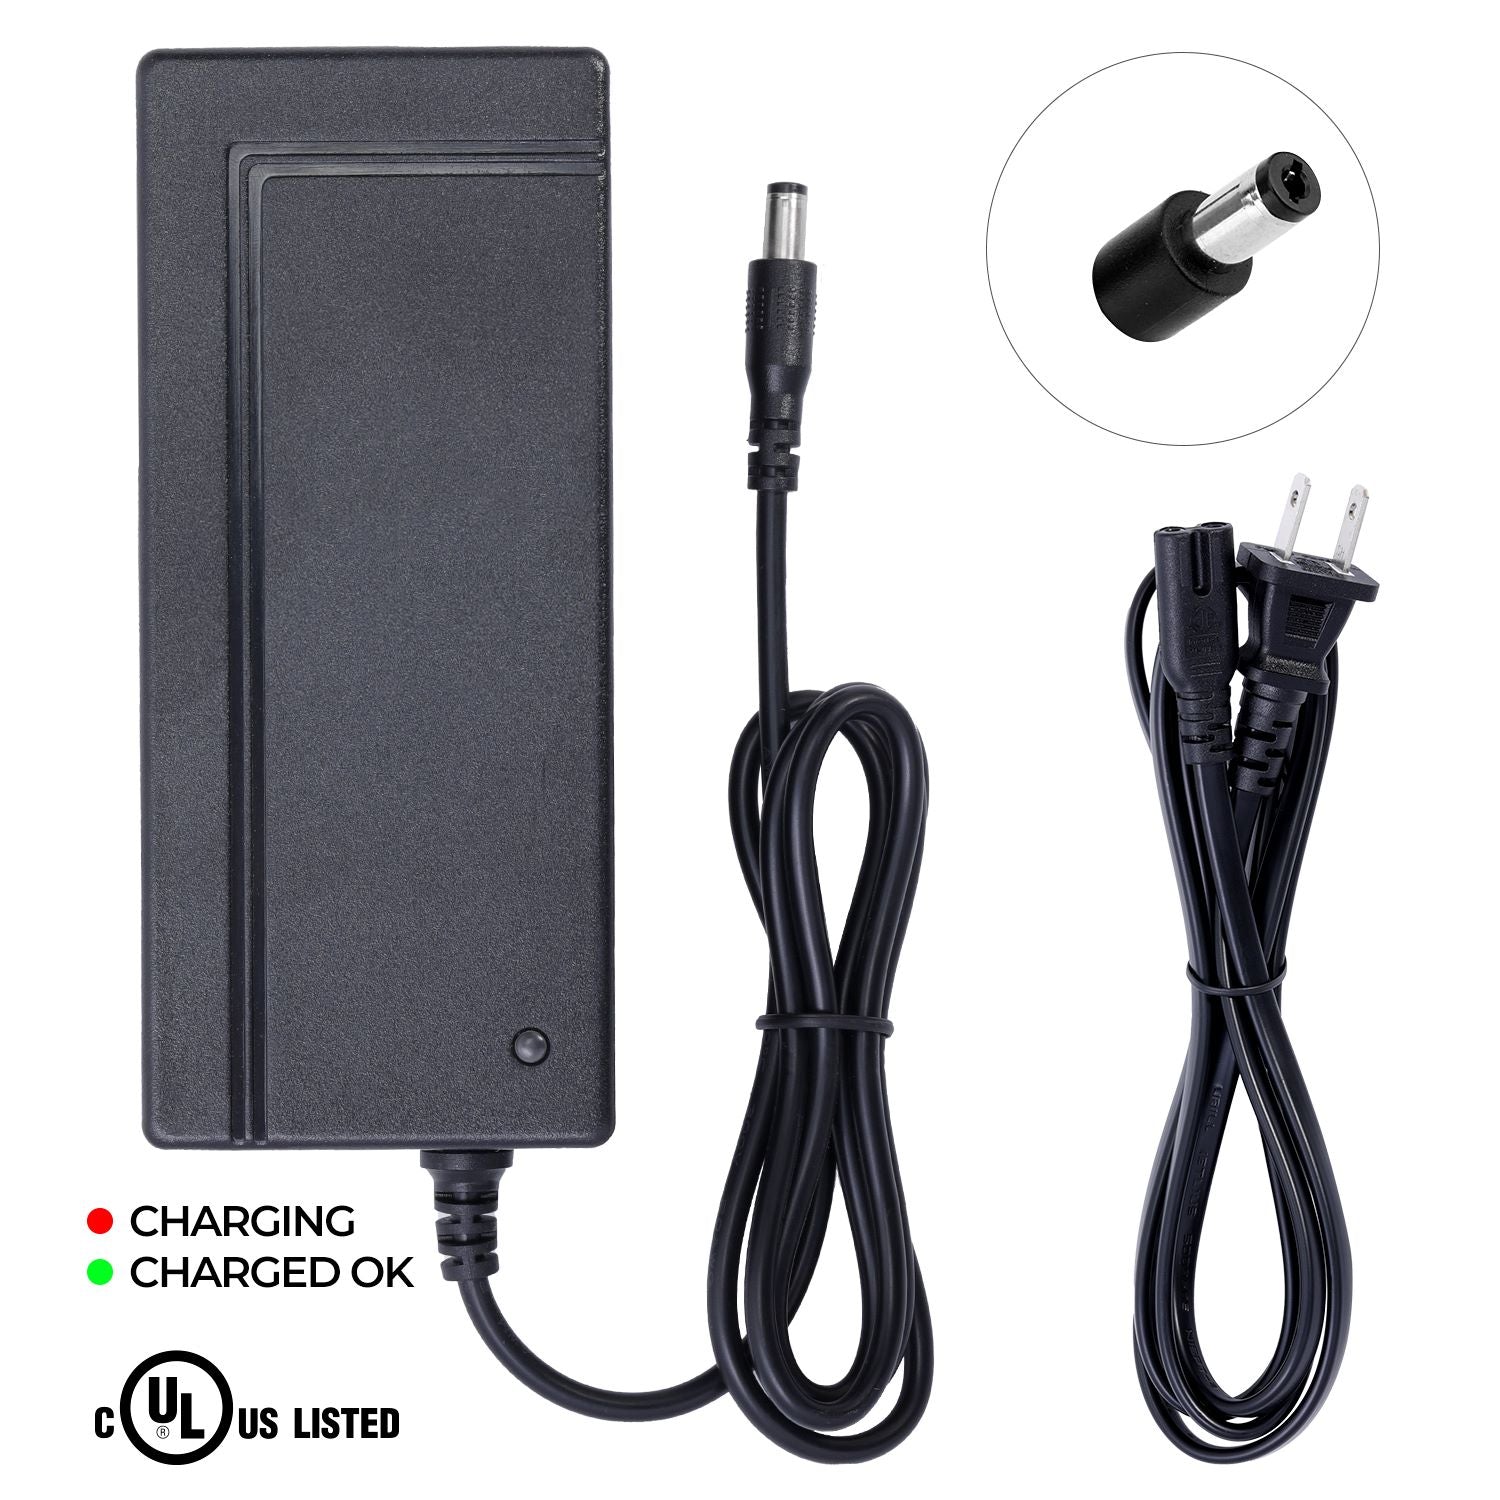 UL Certified Charger for Gyroor C3 Electric Bike